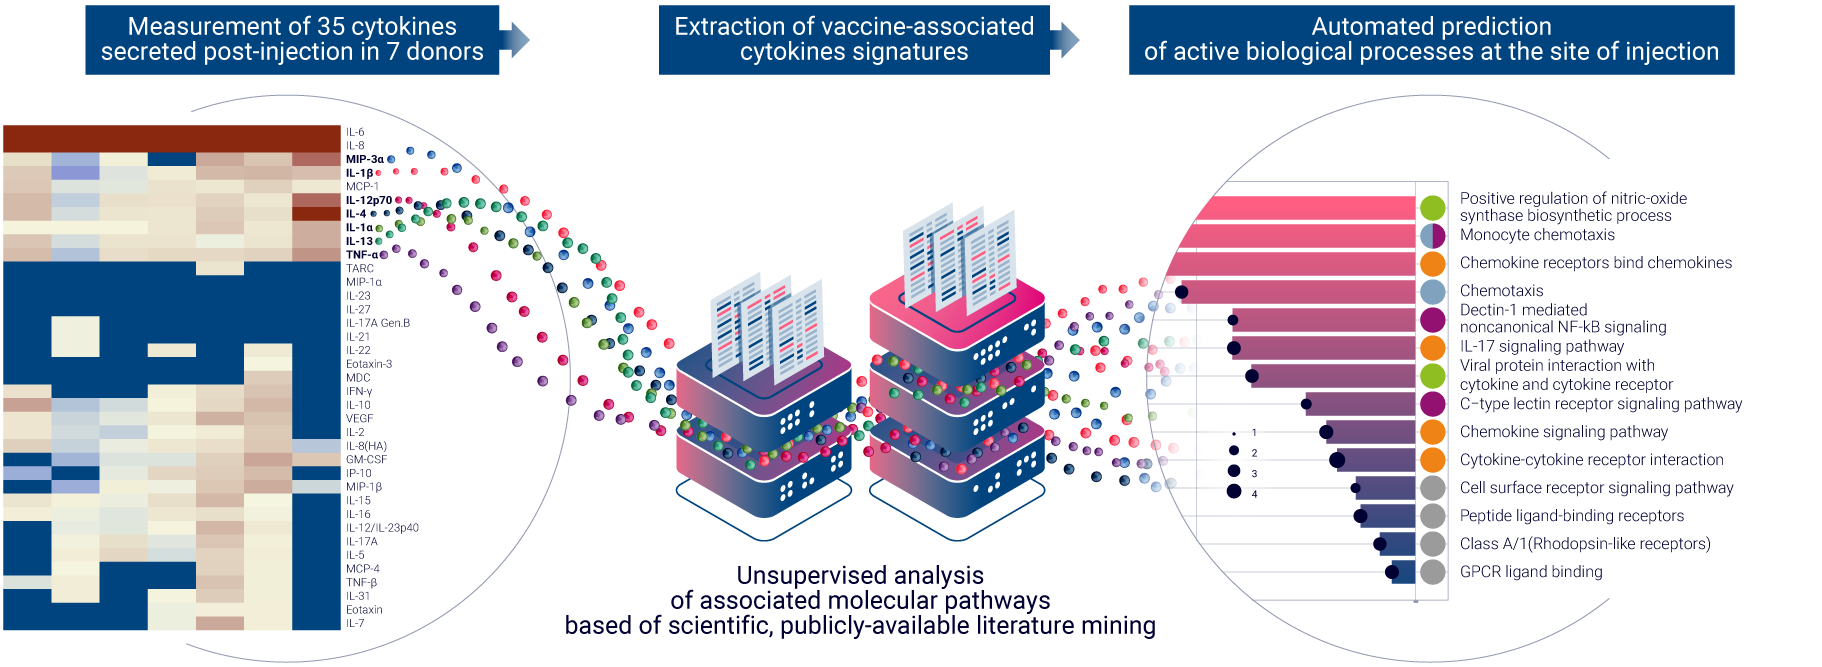 Evaluation of the vaccine candidate immunogenicity at the tissue level using multiplex cytokine analysis and bioinformatics.